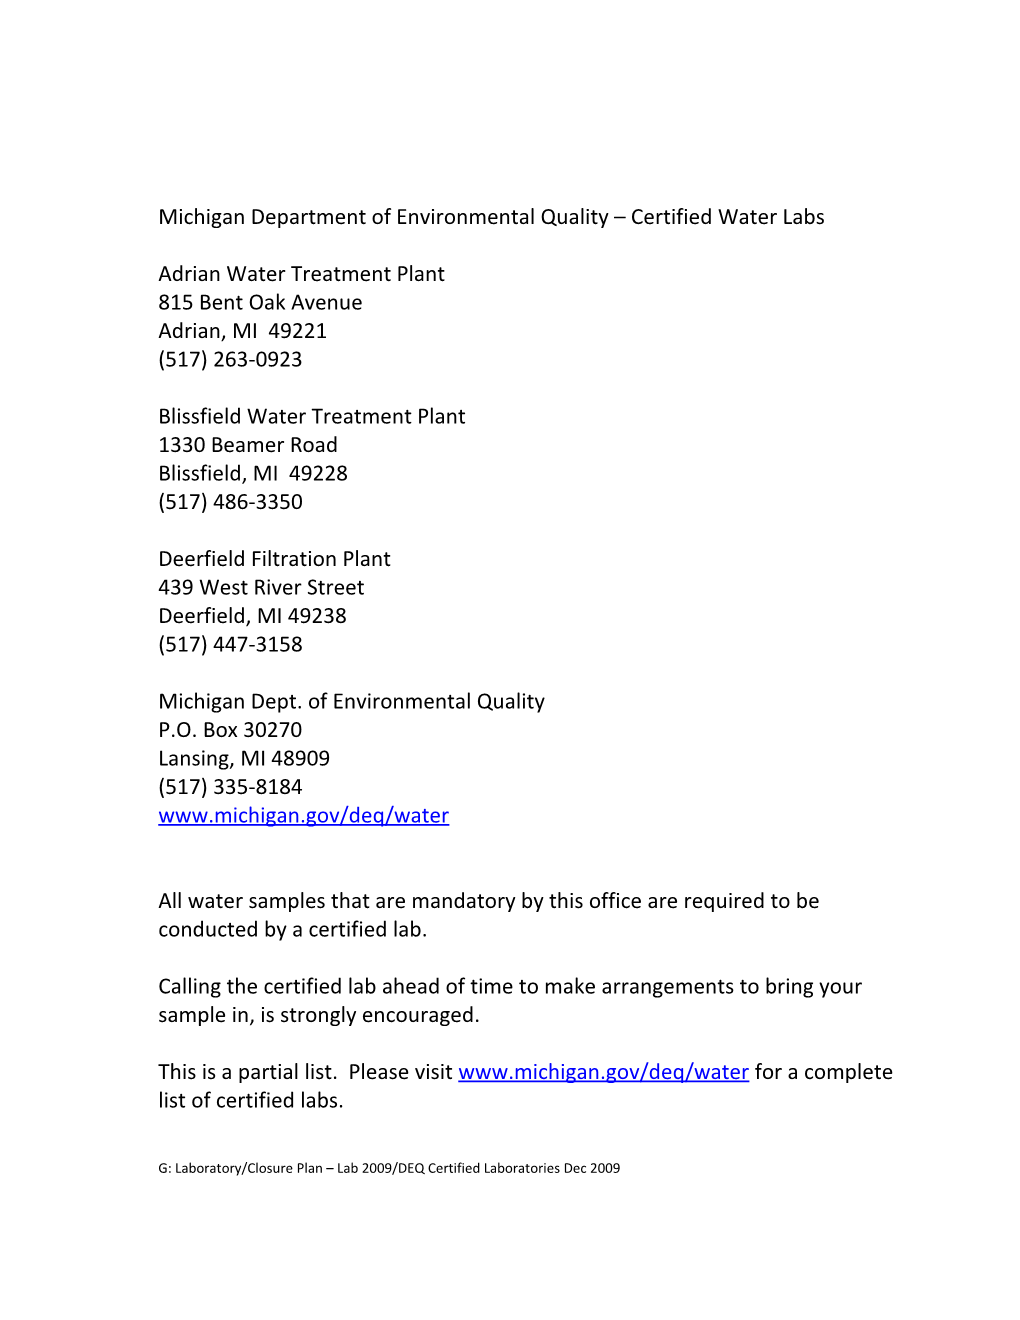 Michigan Department of Environmental Quality Certified Water Labs